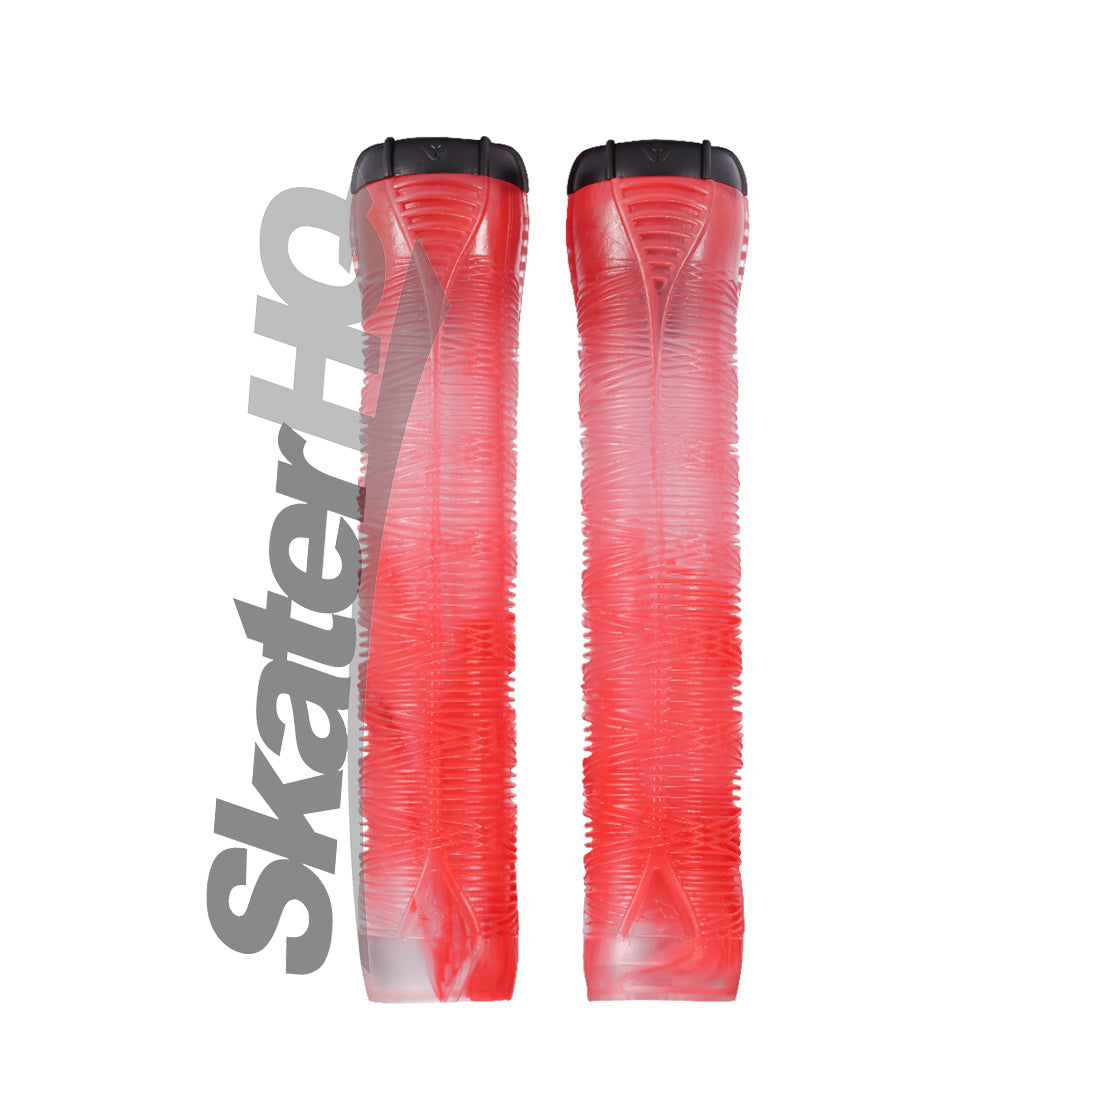 Envy V2 Hand Grips - Smoke Red Scooter Grips